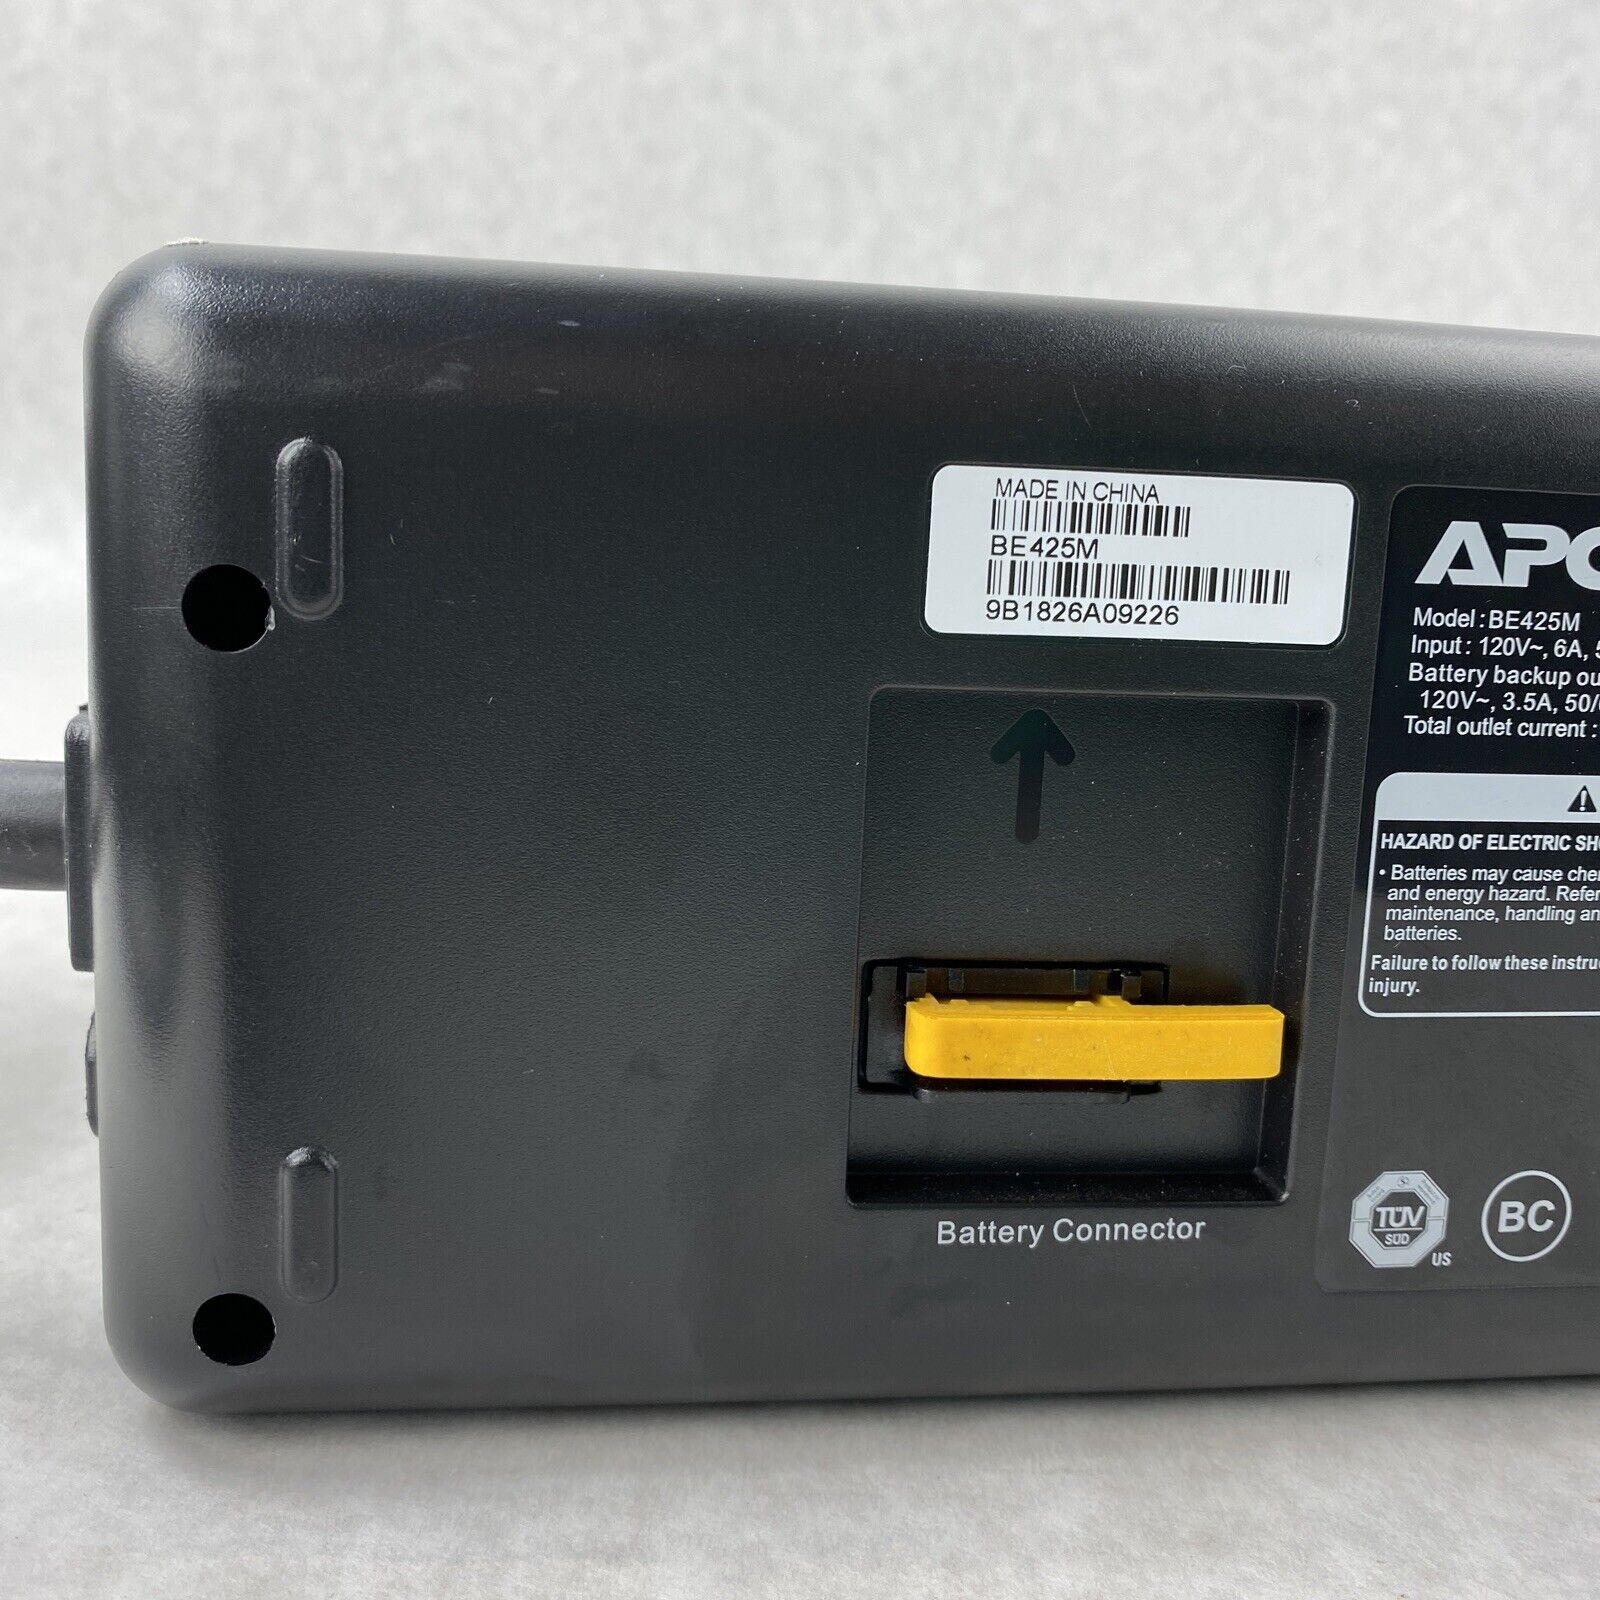 APC BE425M 425VA Battery Back-UPS and Surge Protector w/ Battery